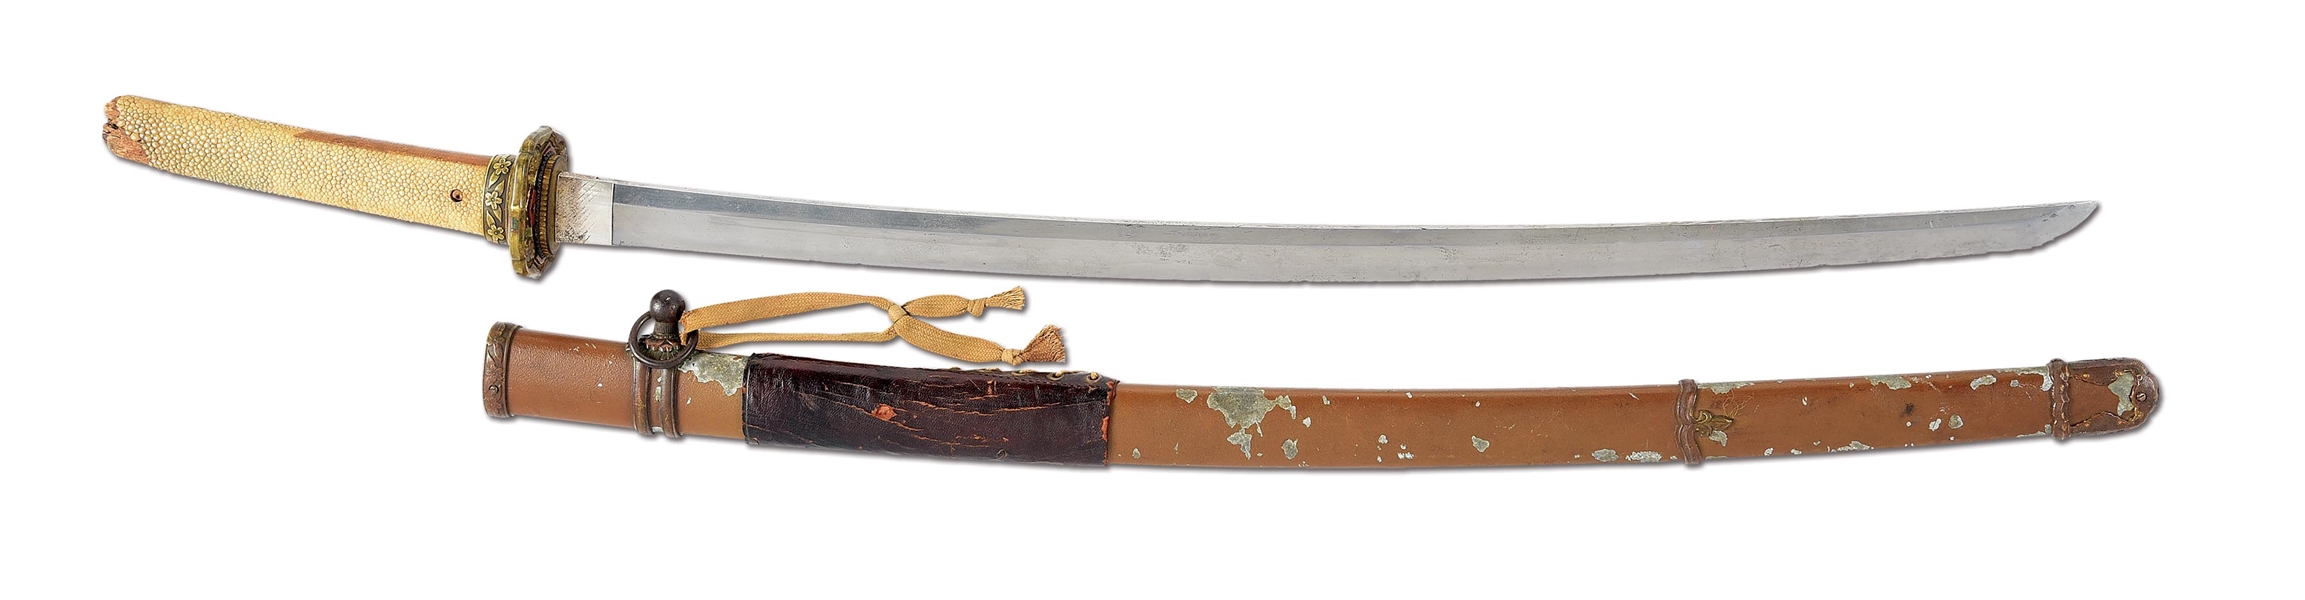 JAPANESE SAMURAI SWORD PRESENTED TO OFFICER IN 1937 WITH EXTENSIVE TANG INSCRIPTION.